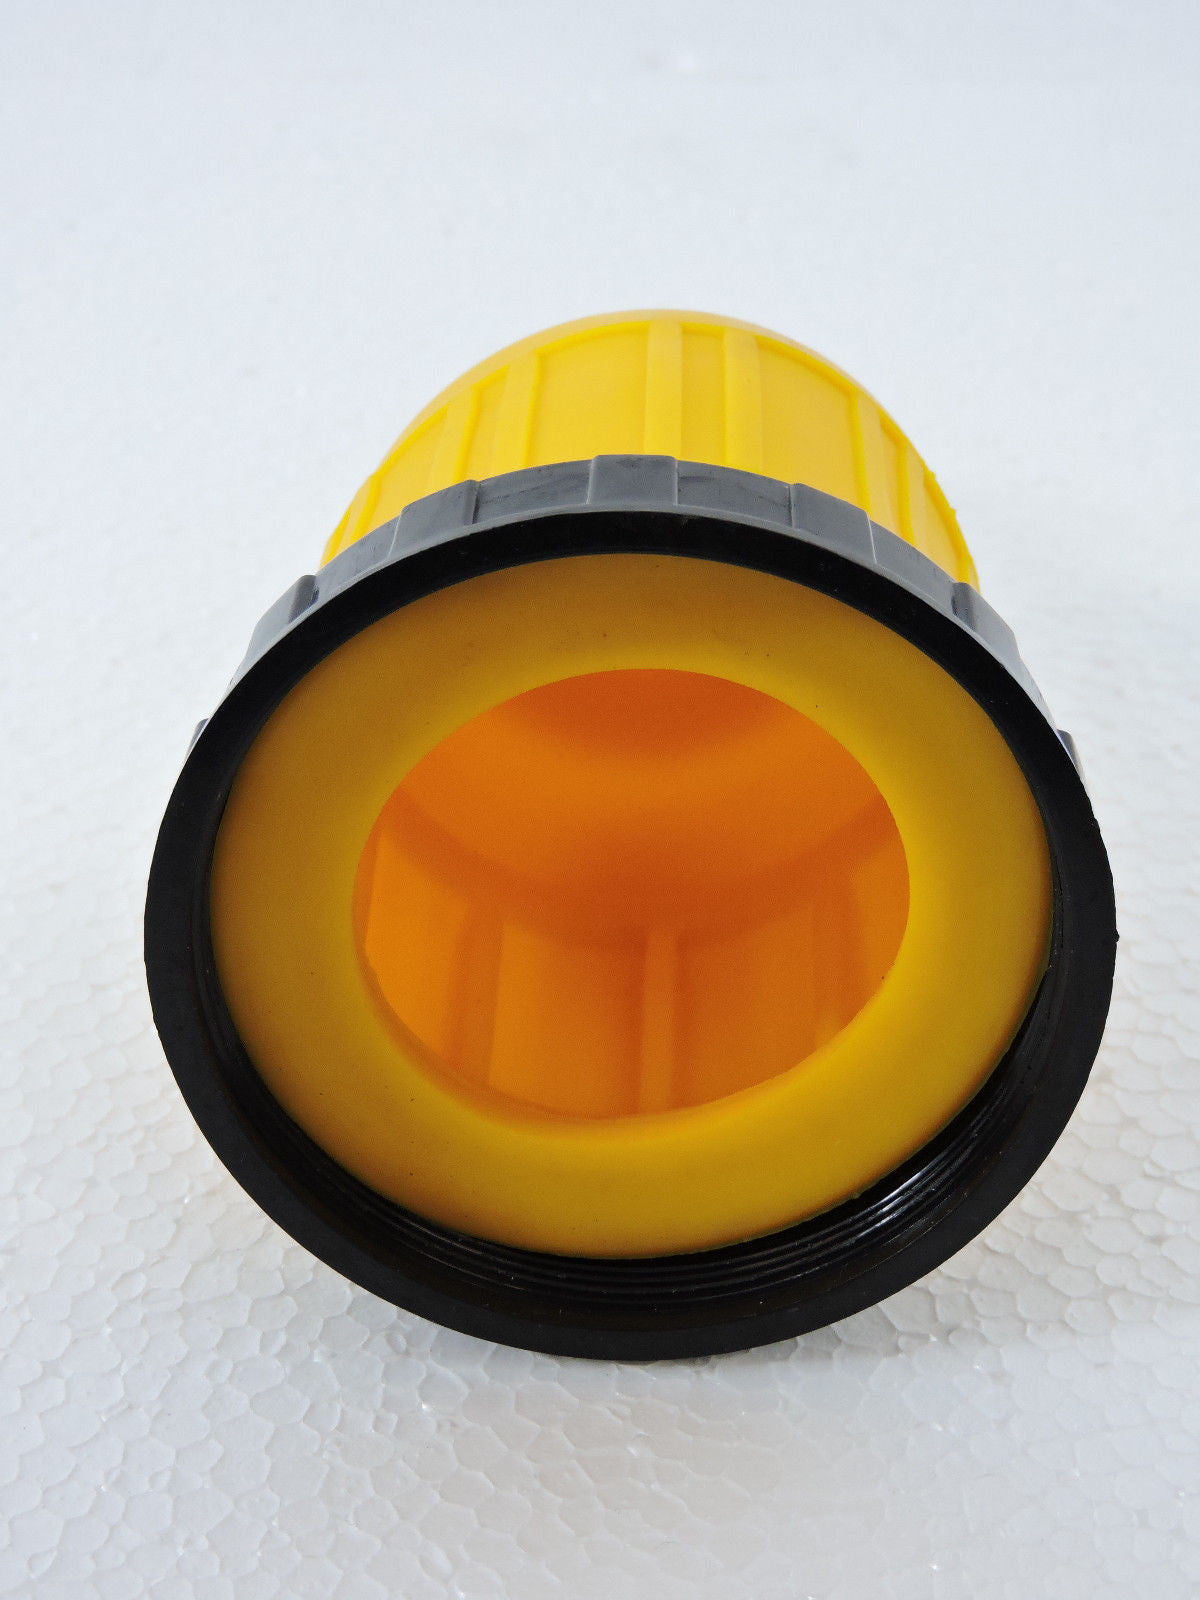 Trekpower black ring for yellow boot